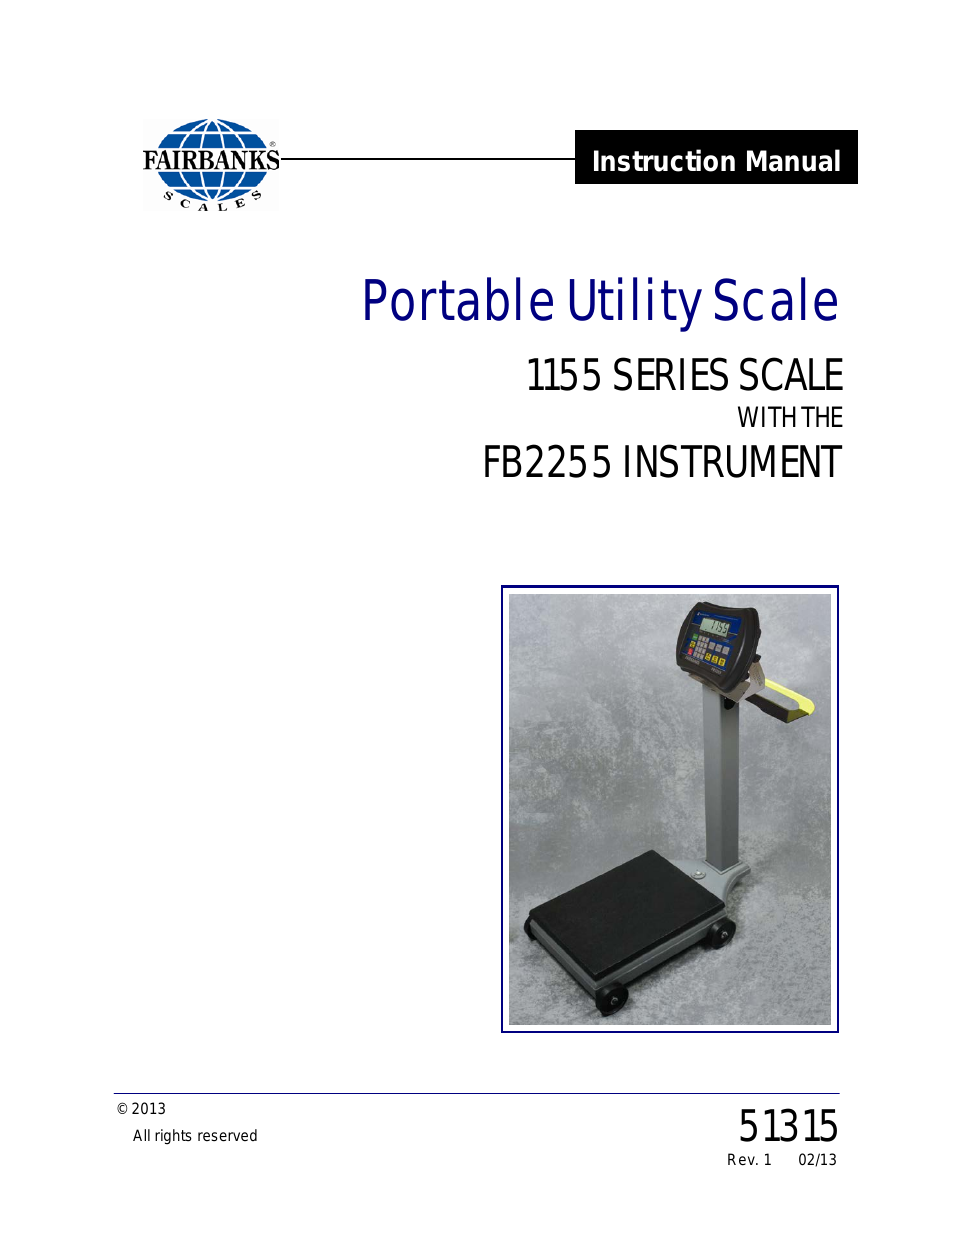 1155 SERIES Portable Utility SCALE WITH THE FB2255